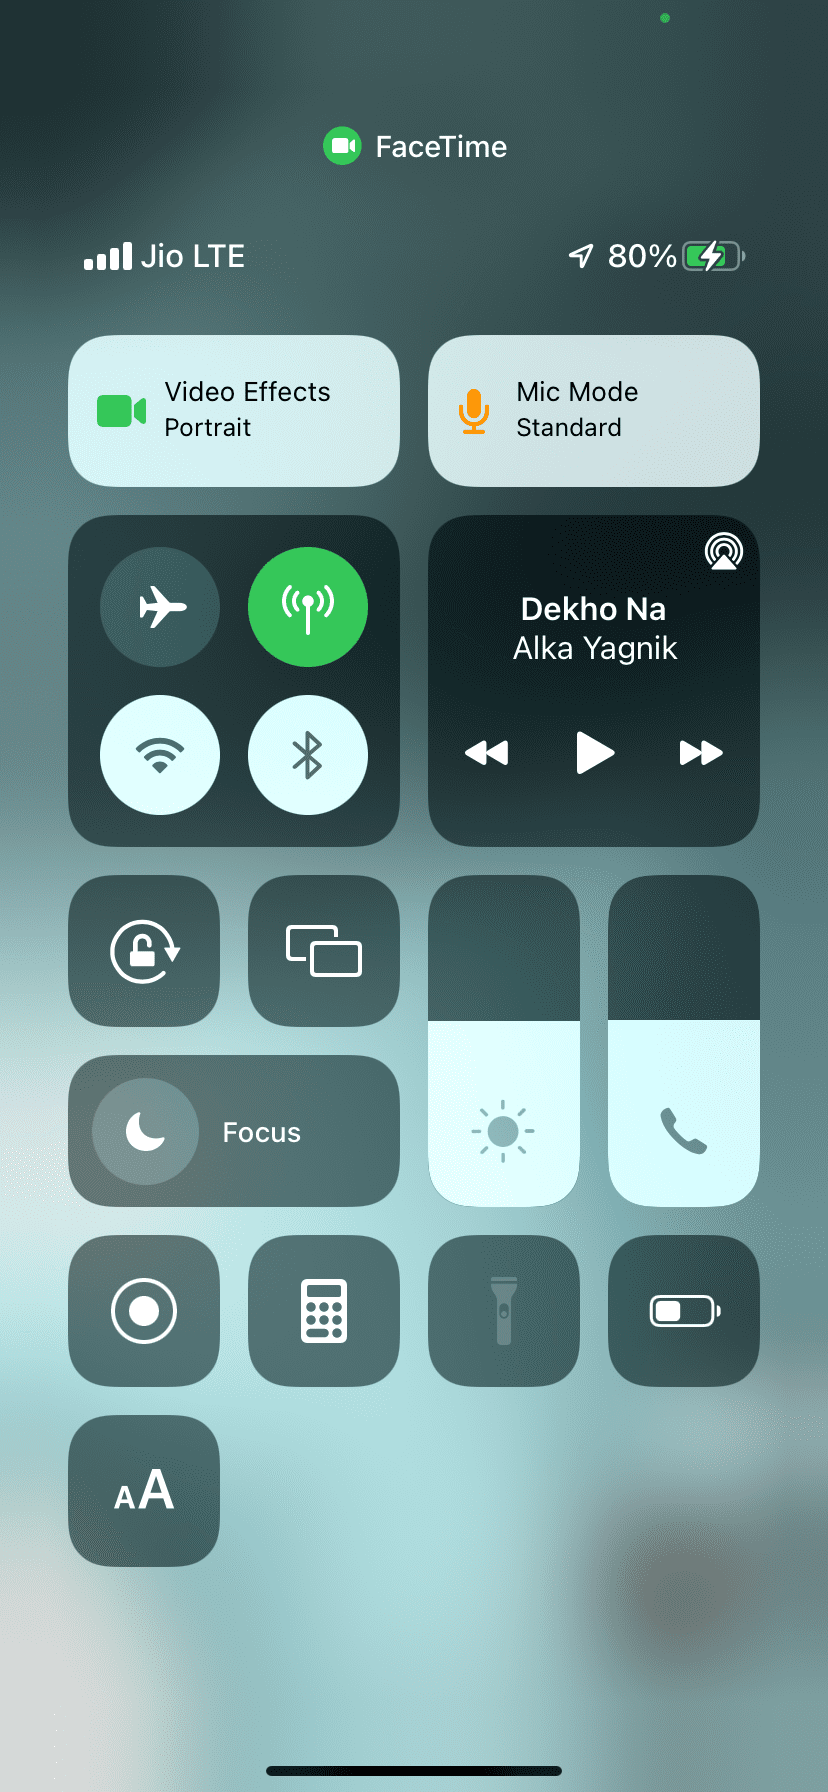 Tap Mic Mode in iOS 15 Control Center during FaceTime Video Call